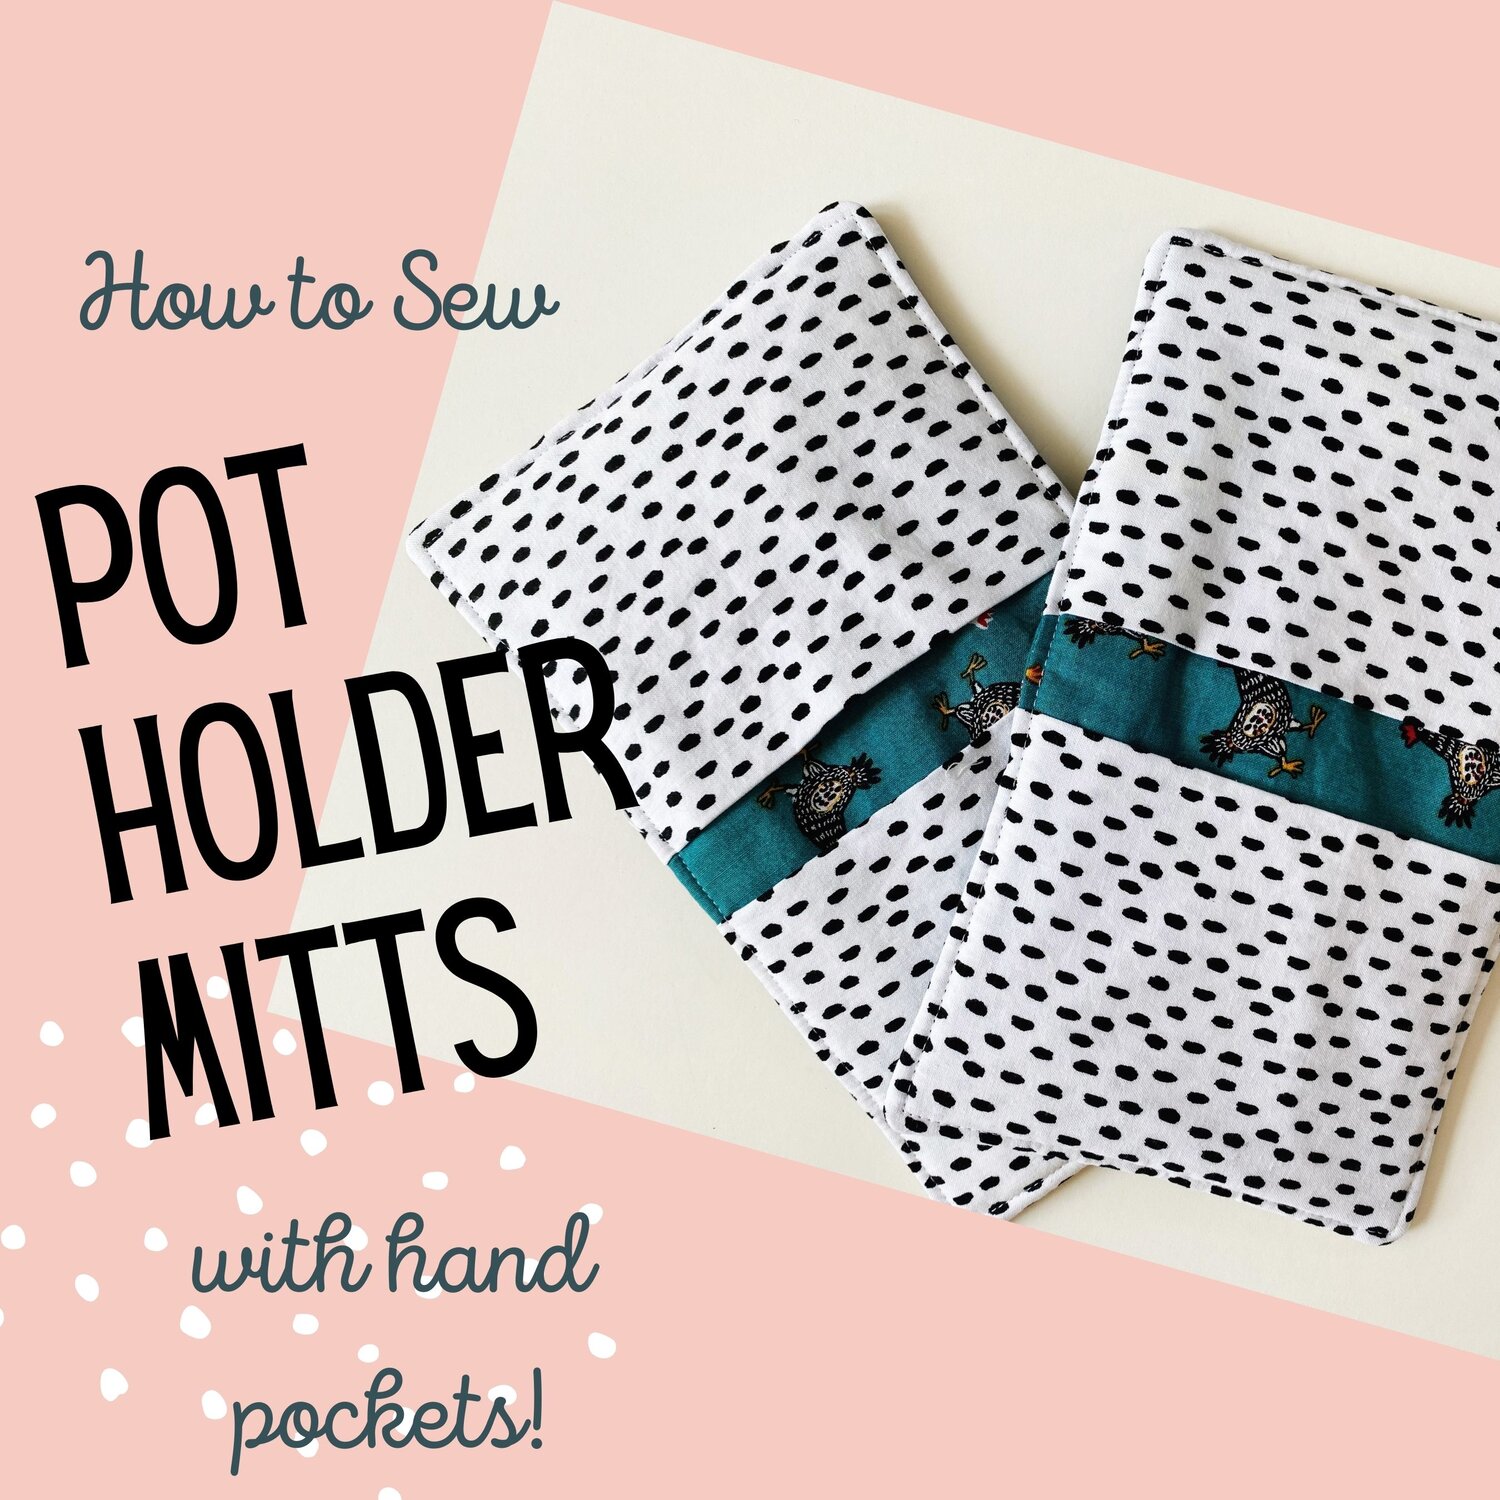 Pot Holders with Hand Pockets